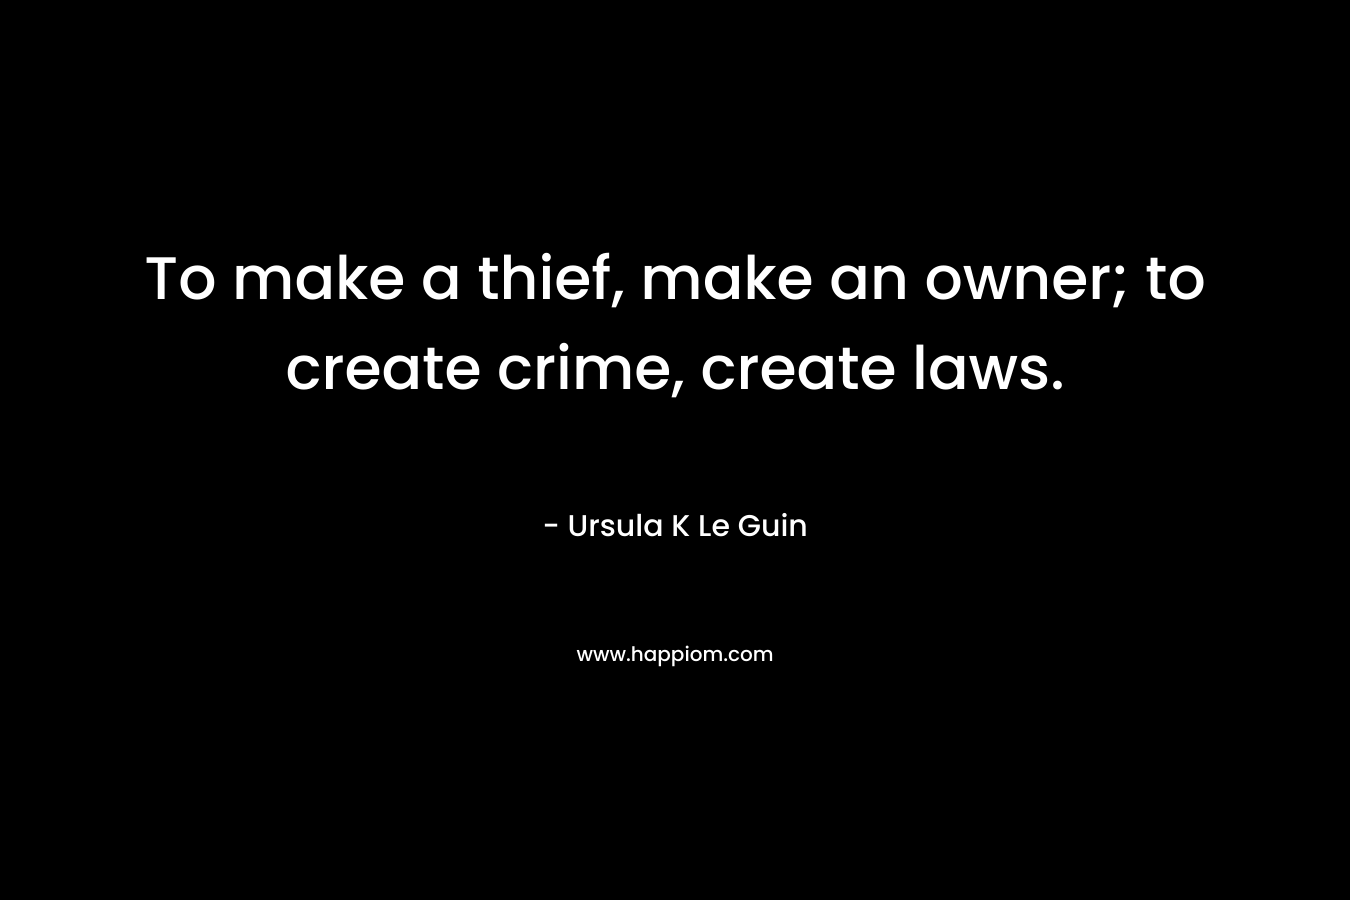 To make a thief, make an owner; to create crime, create laws. – Ursula K Le Guin